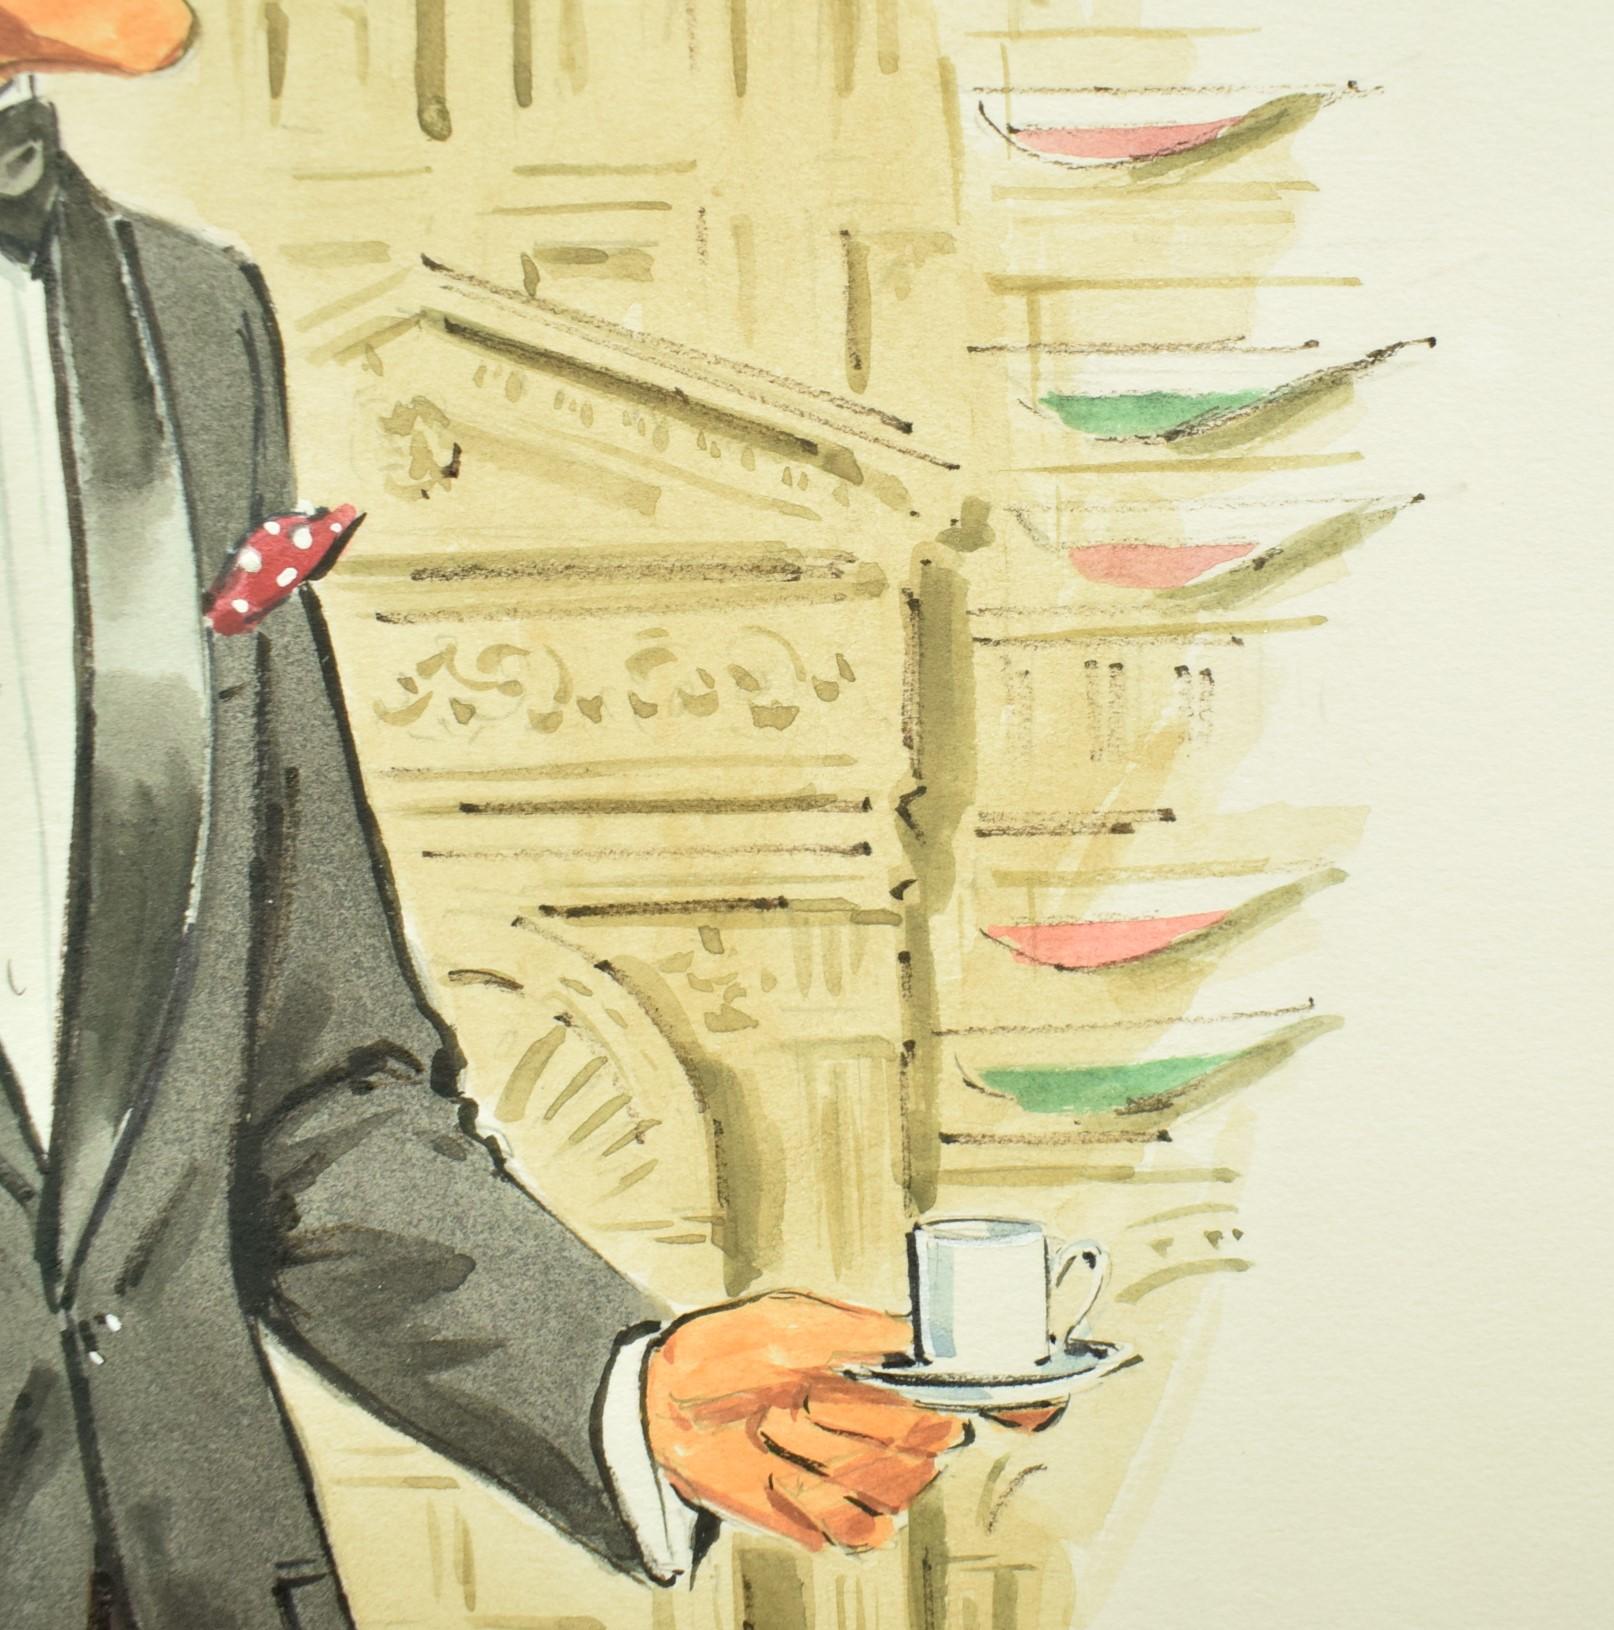 Original watercolour c1970s illustration artwork commissioned by Chipp Clothier featuring a gent modeling tartan trousers/ evening pumps & shawl collar dinner jacket in The New York Yacht Club West 44th St cocktail lounge

Art Sz: 20 1/4